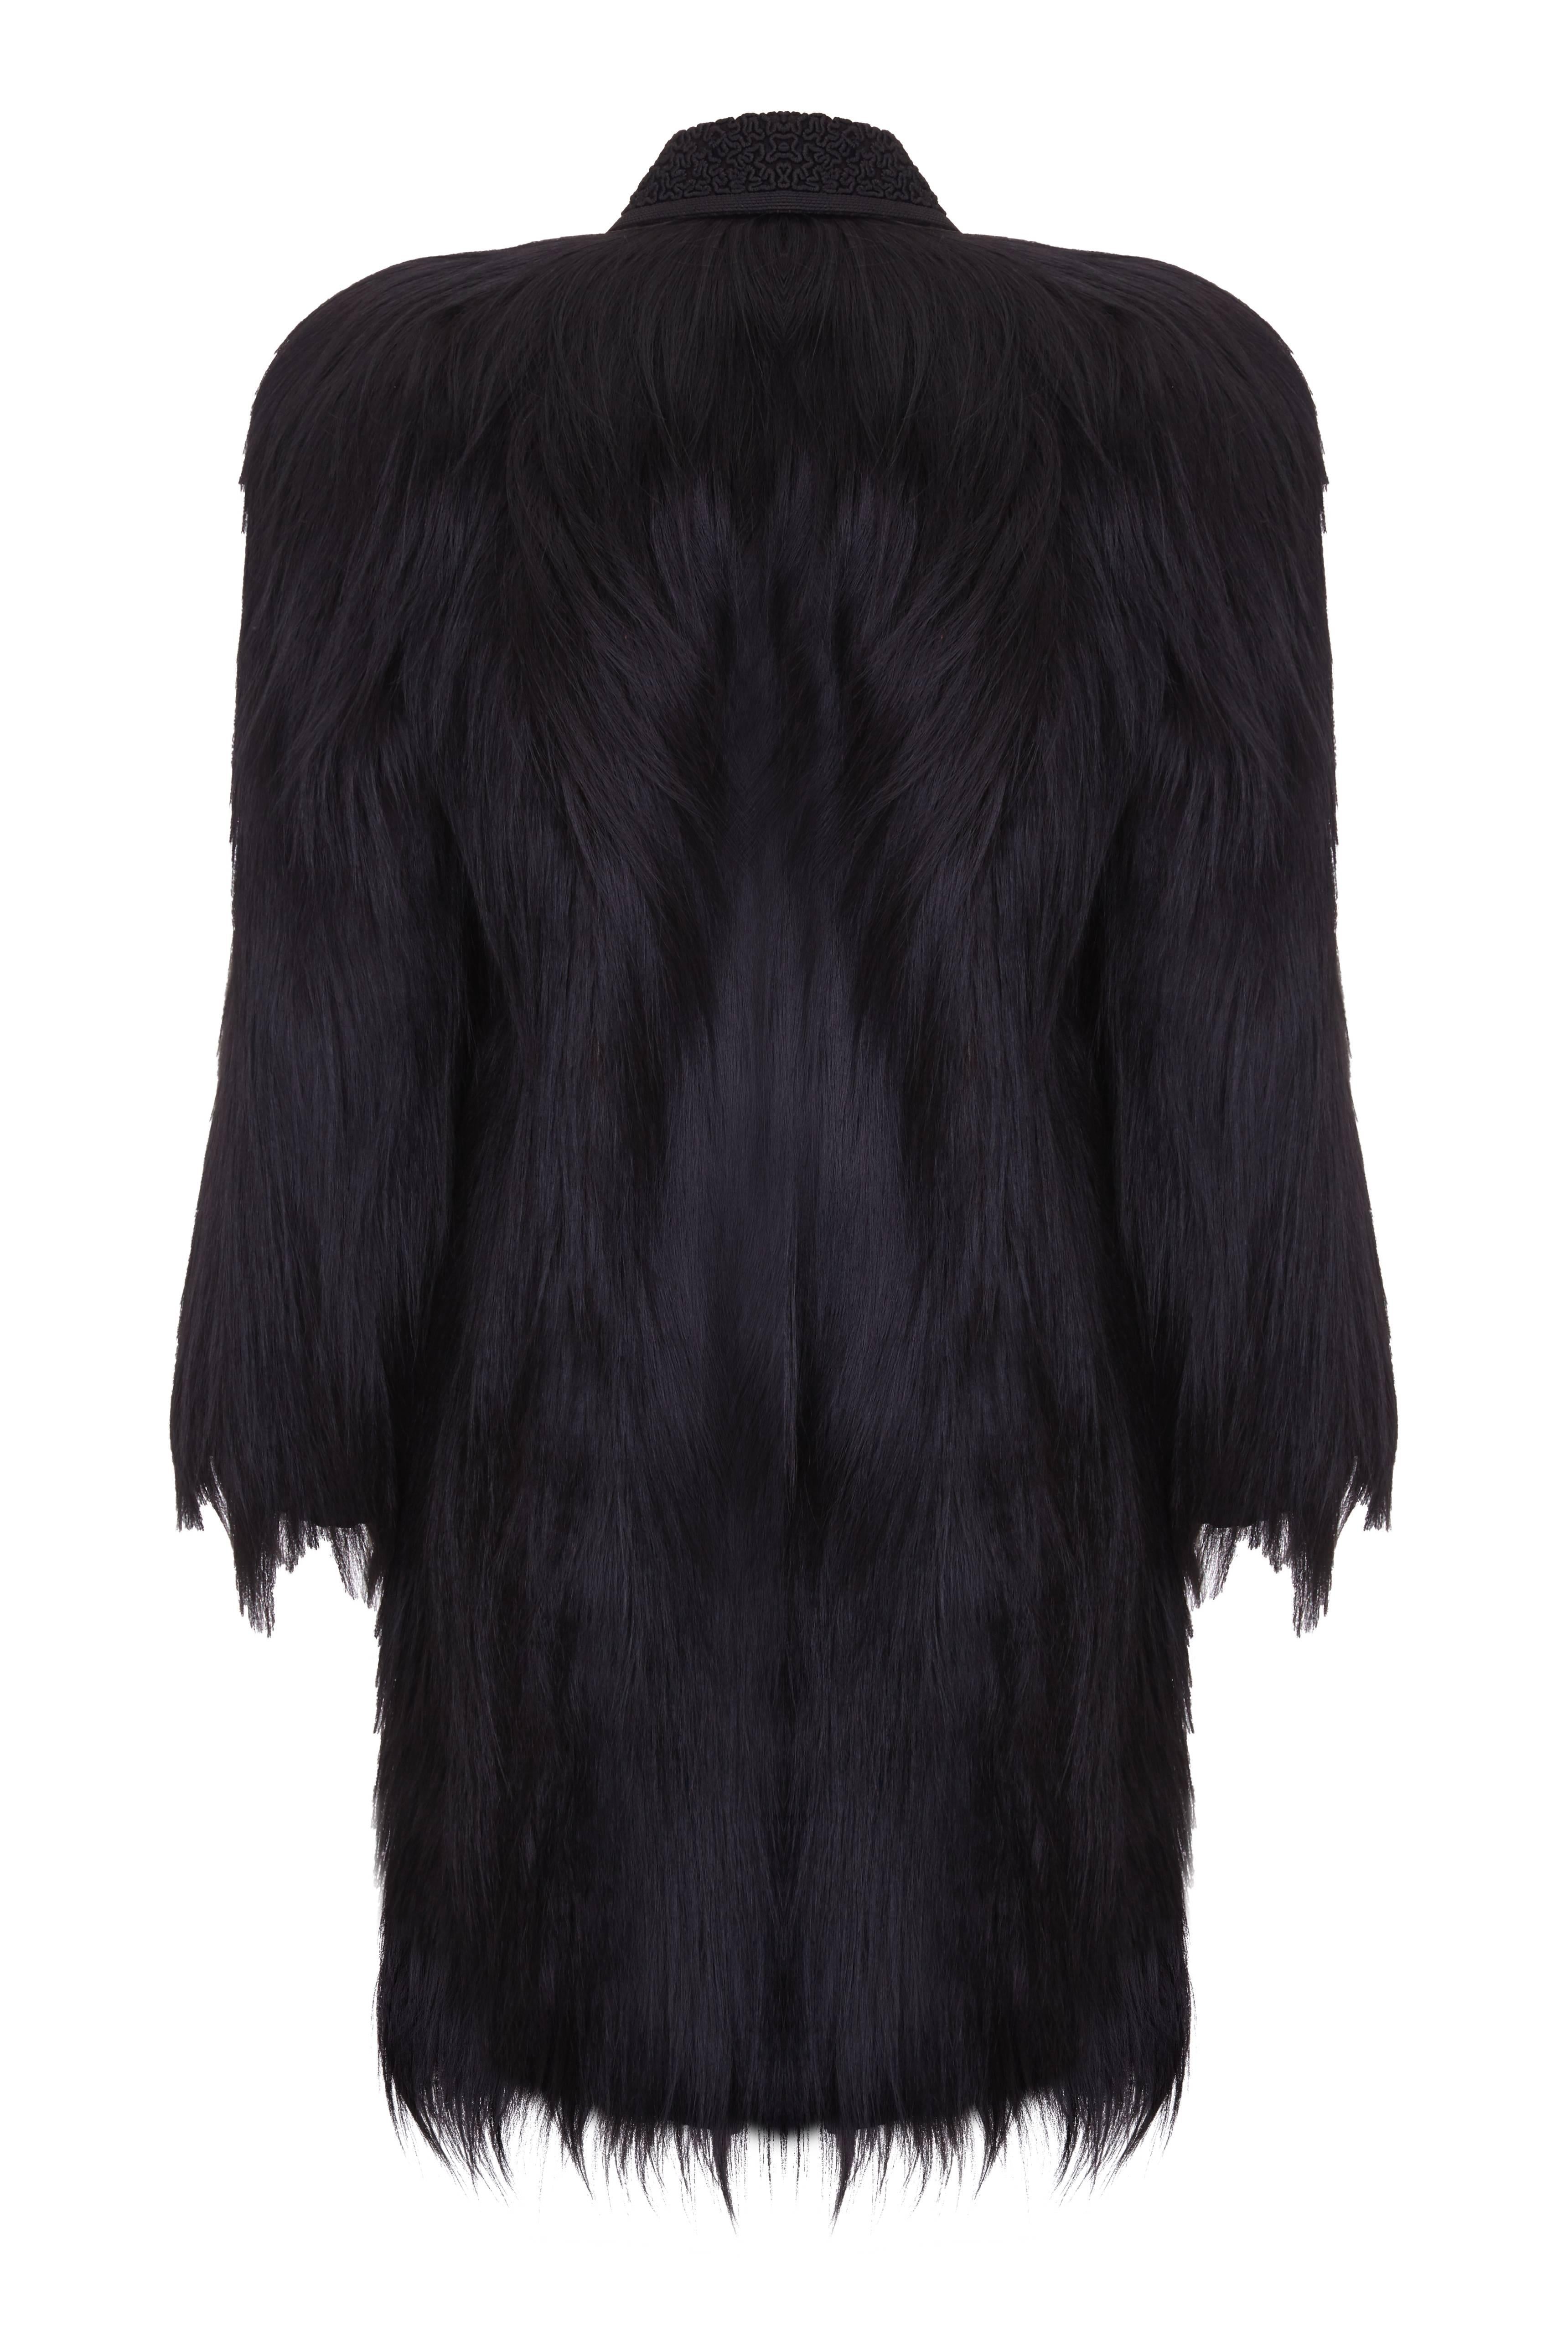 A beautiful vintage black colobus monkey fur coat with black soutache embroidered collar in truly excellent condition.  This pieces features exaggerated padded shoulders in typical 40s style and ¾ sleeves which fasten all the way up with poppers and